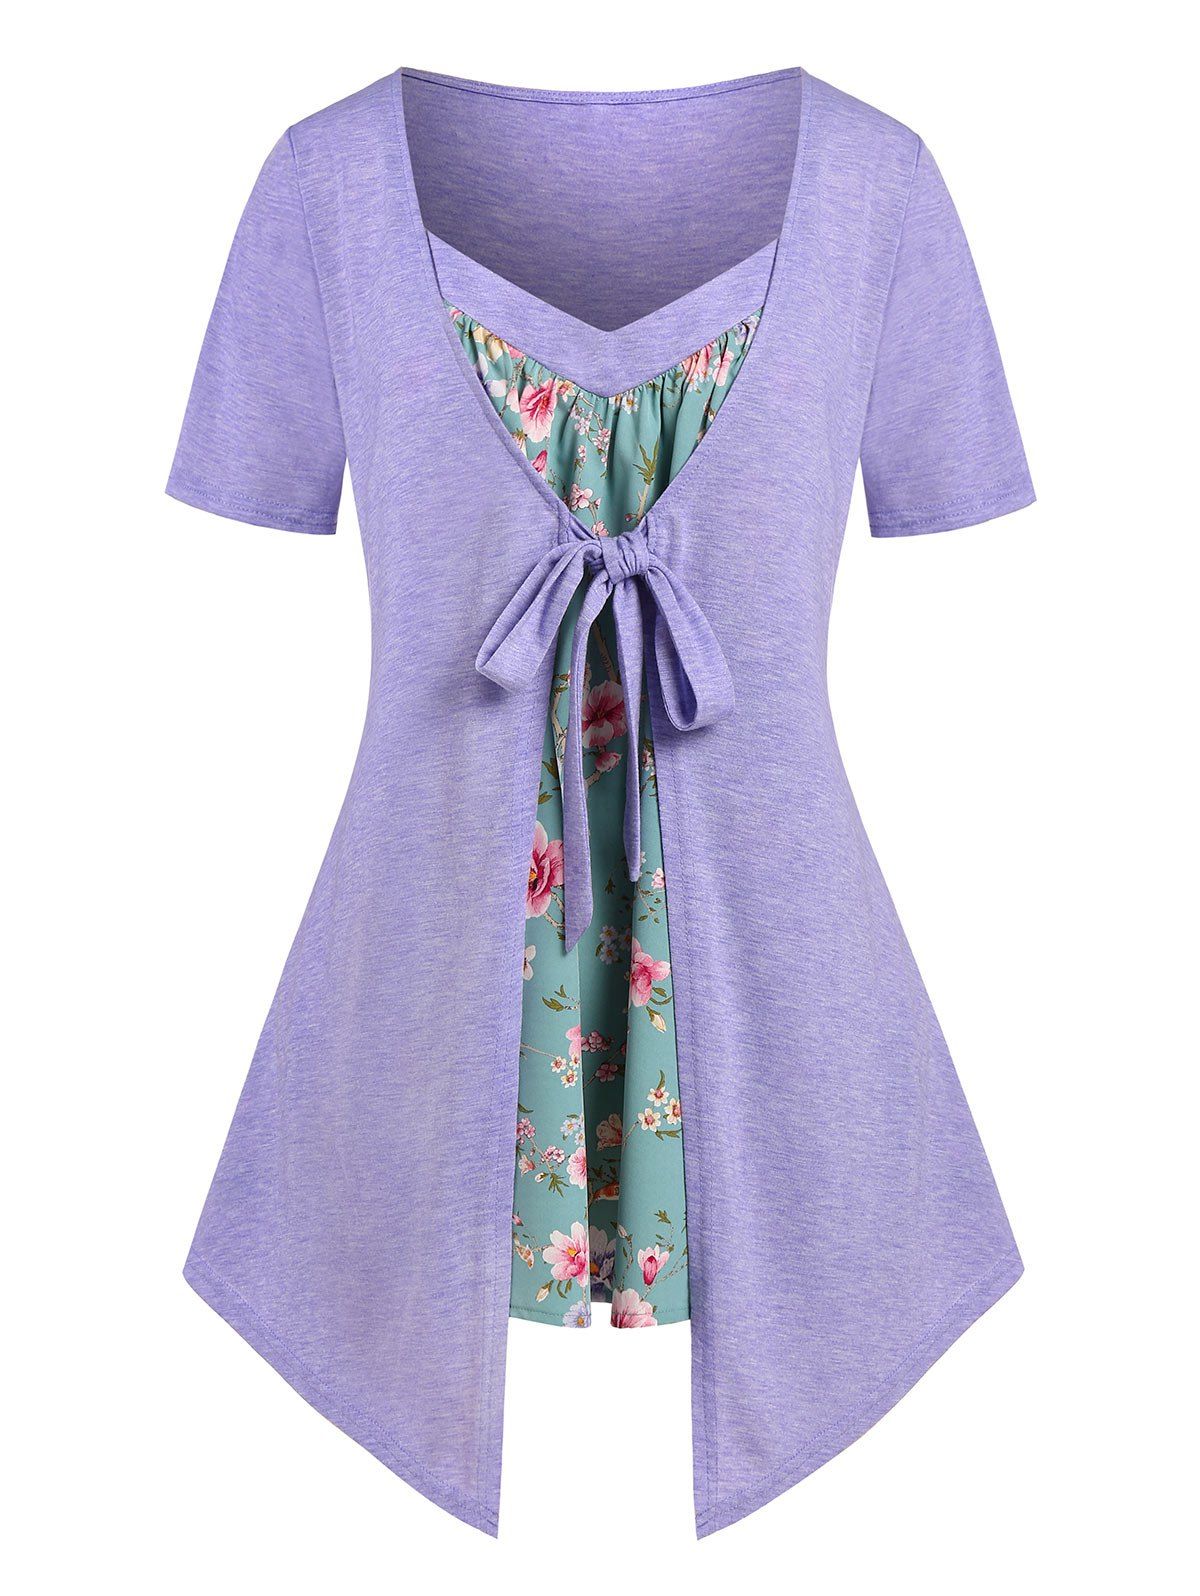 Plus Size Front Tie Floral Print 2 in 1 Tee - LIGHT PURPLE 5X